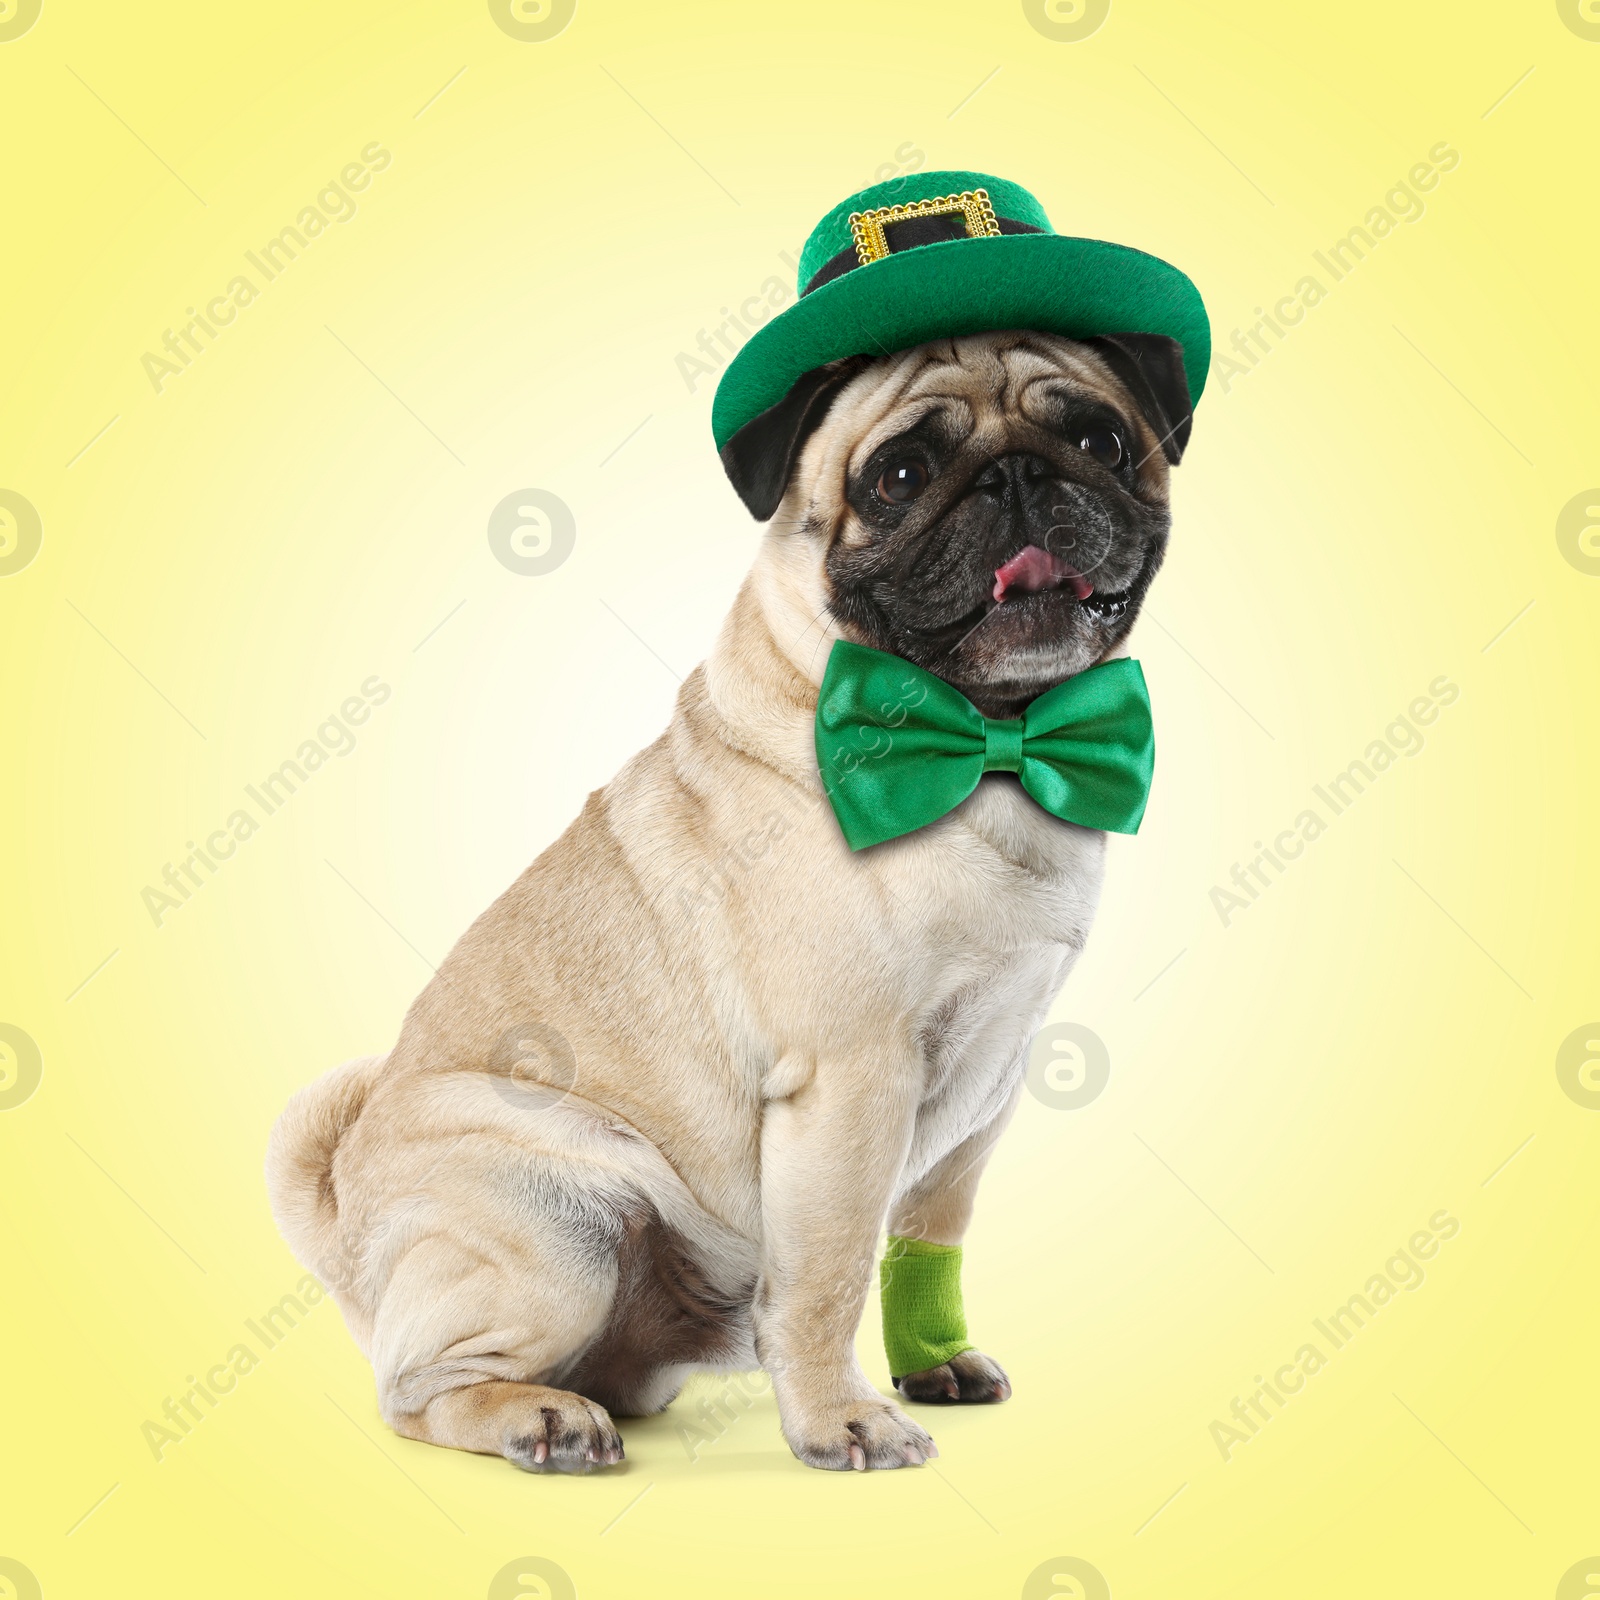 Image of St. Patrick's day celebration. Cute pug dog with green bow tie and leprechaun hat on yellow background